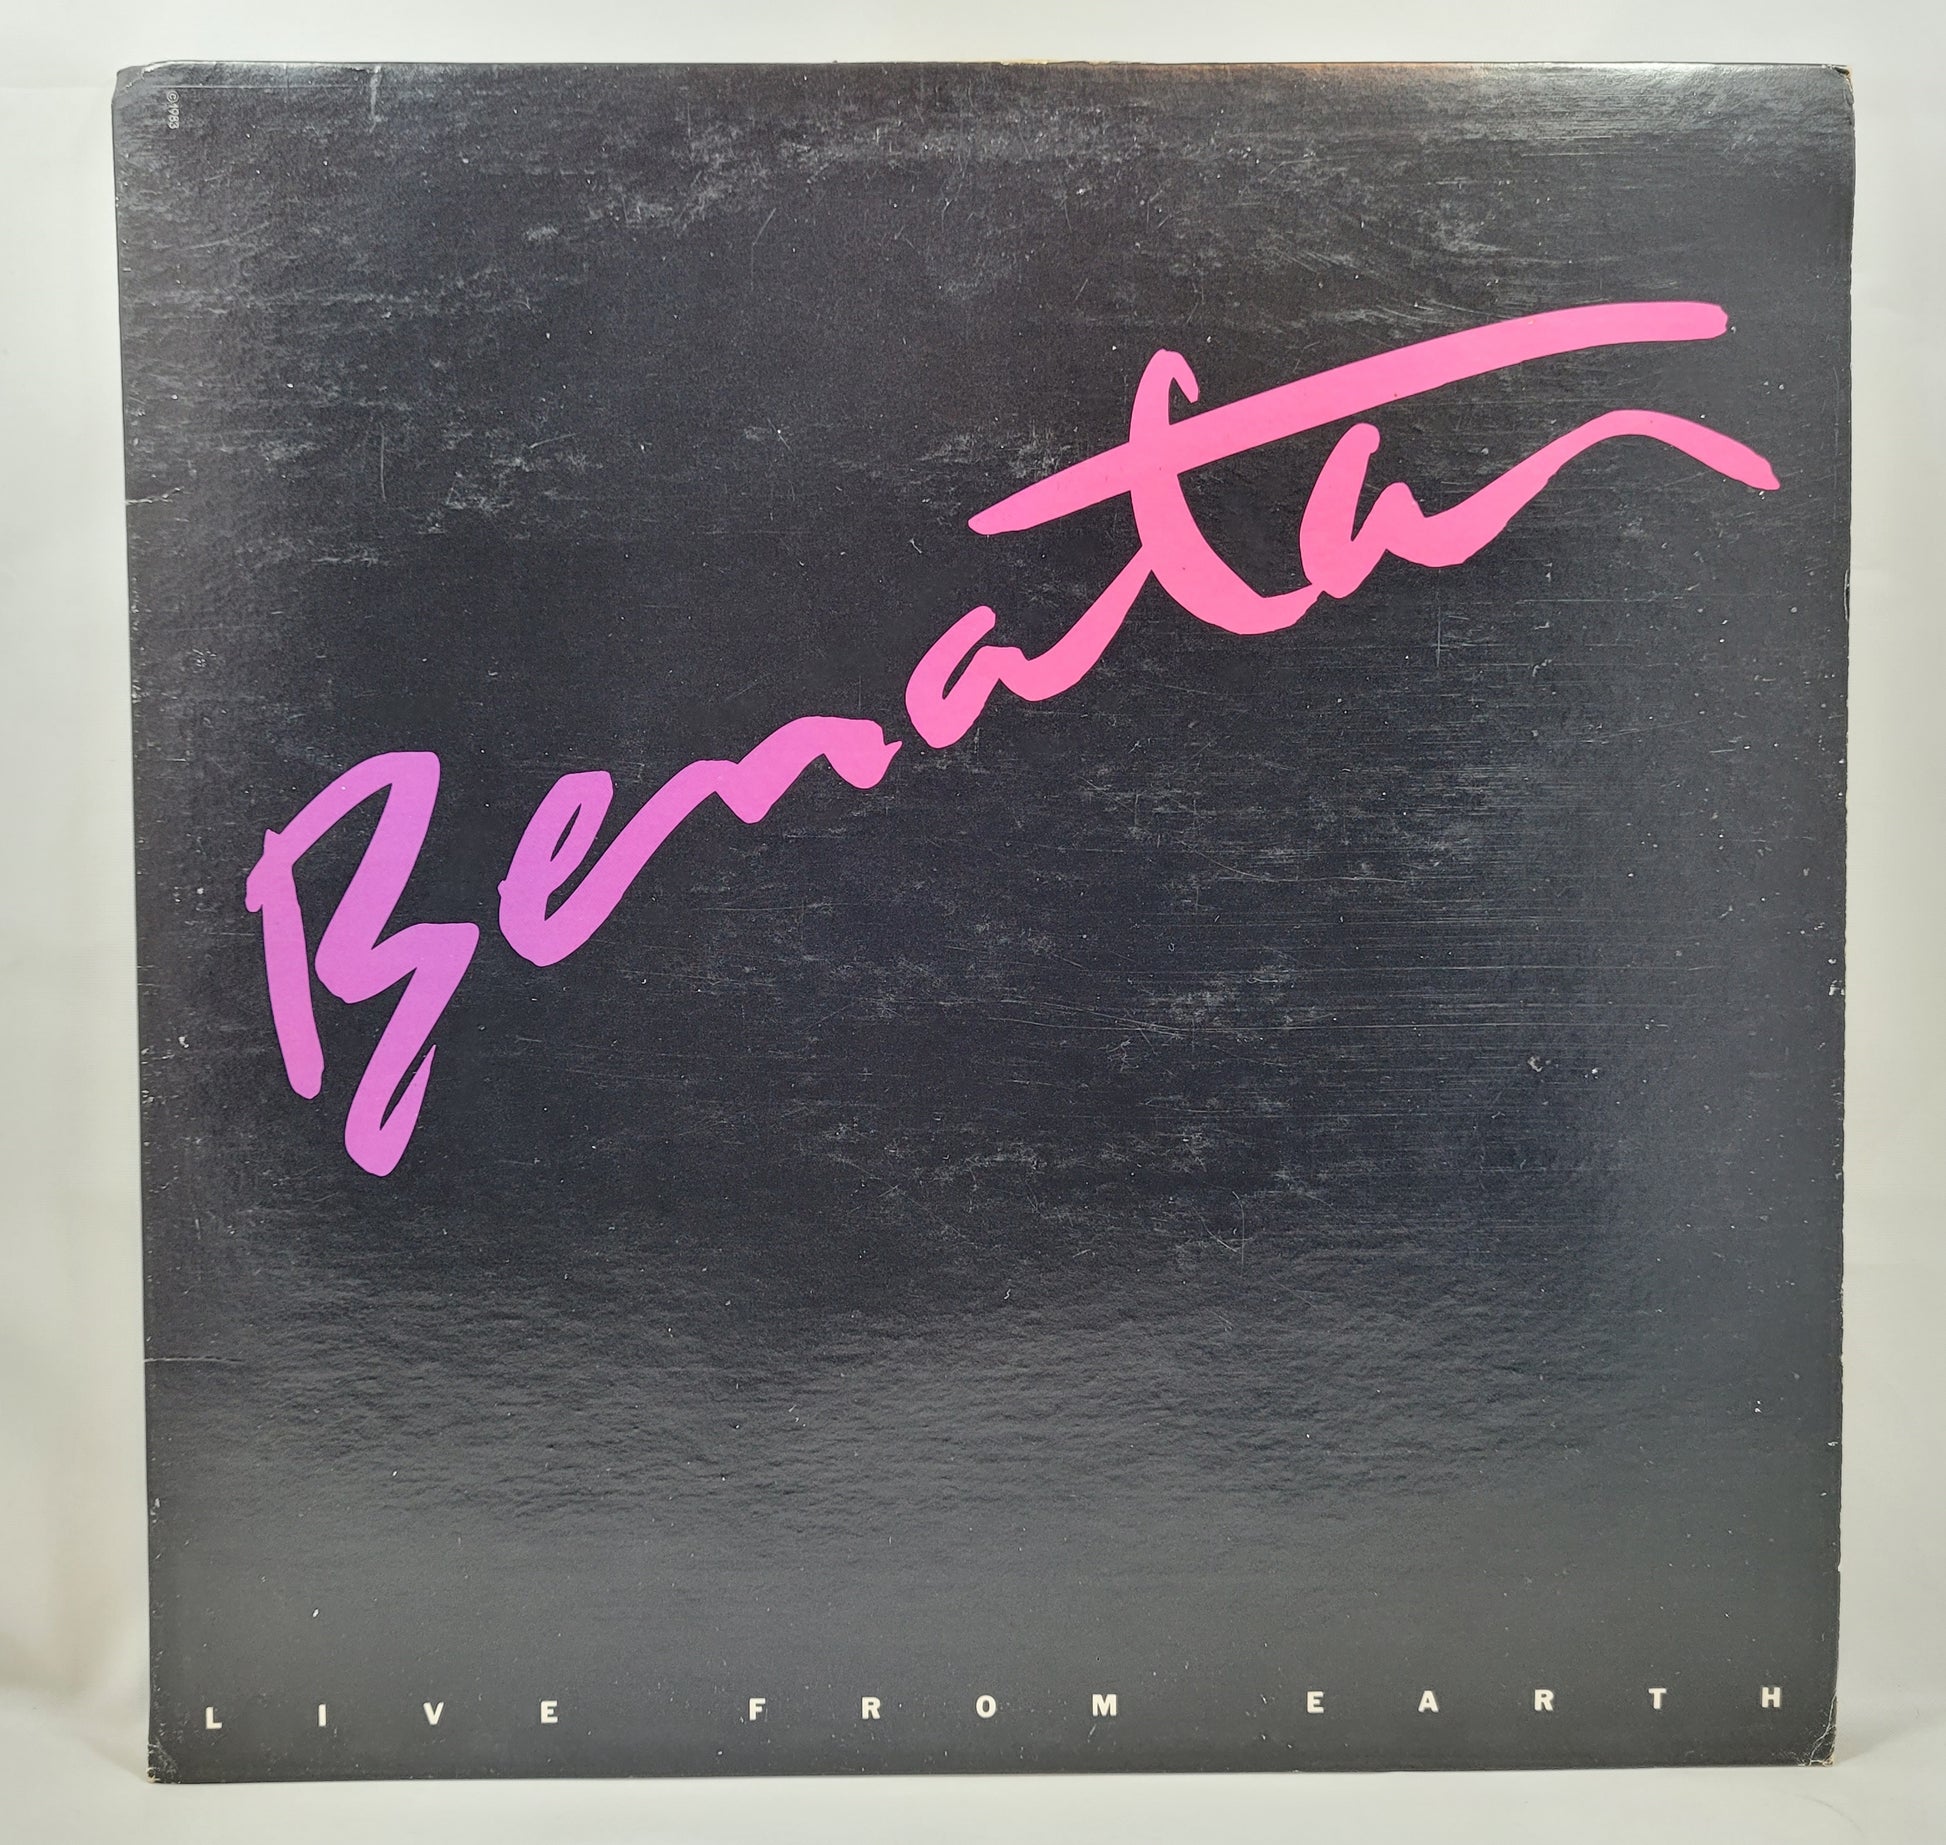 Pat Benatar - Live From Earth [1983 Club Edition] [Used Vinyl Record LP]